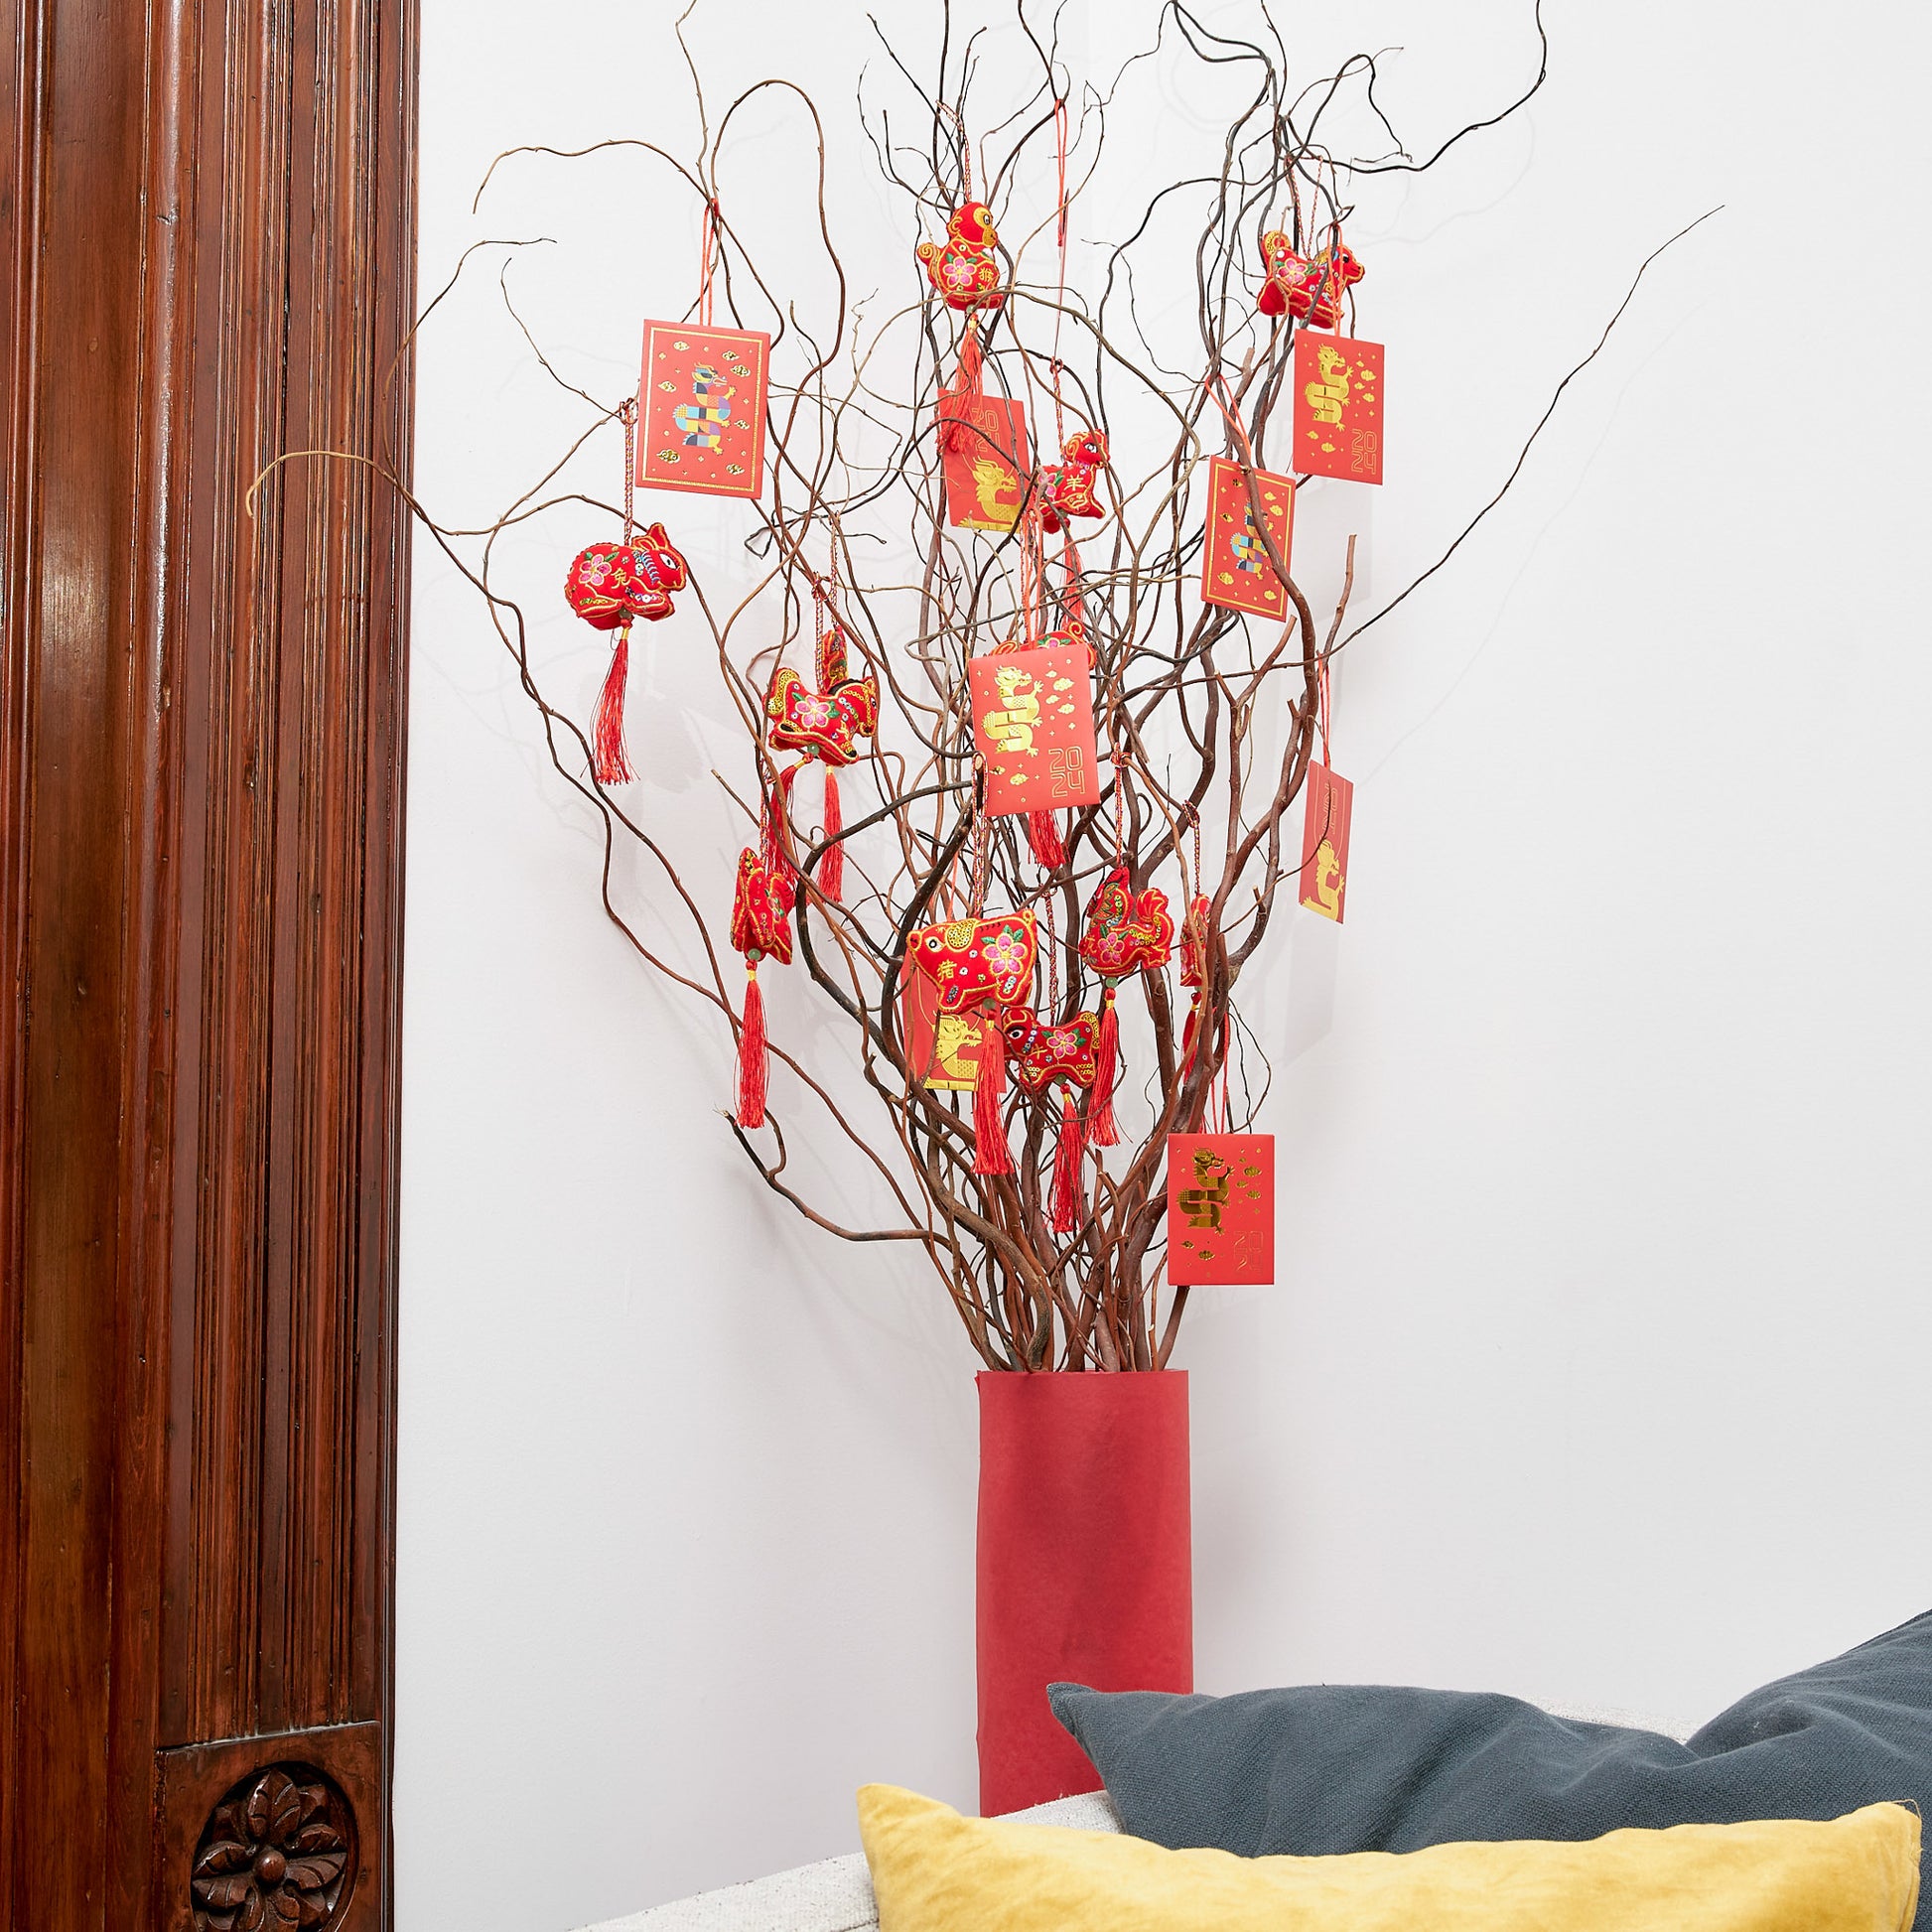 Lunar New Year, Chinese New Year, Vietnamese New Year, Tet decorations, gifts